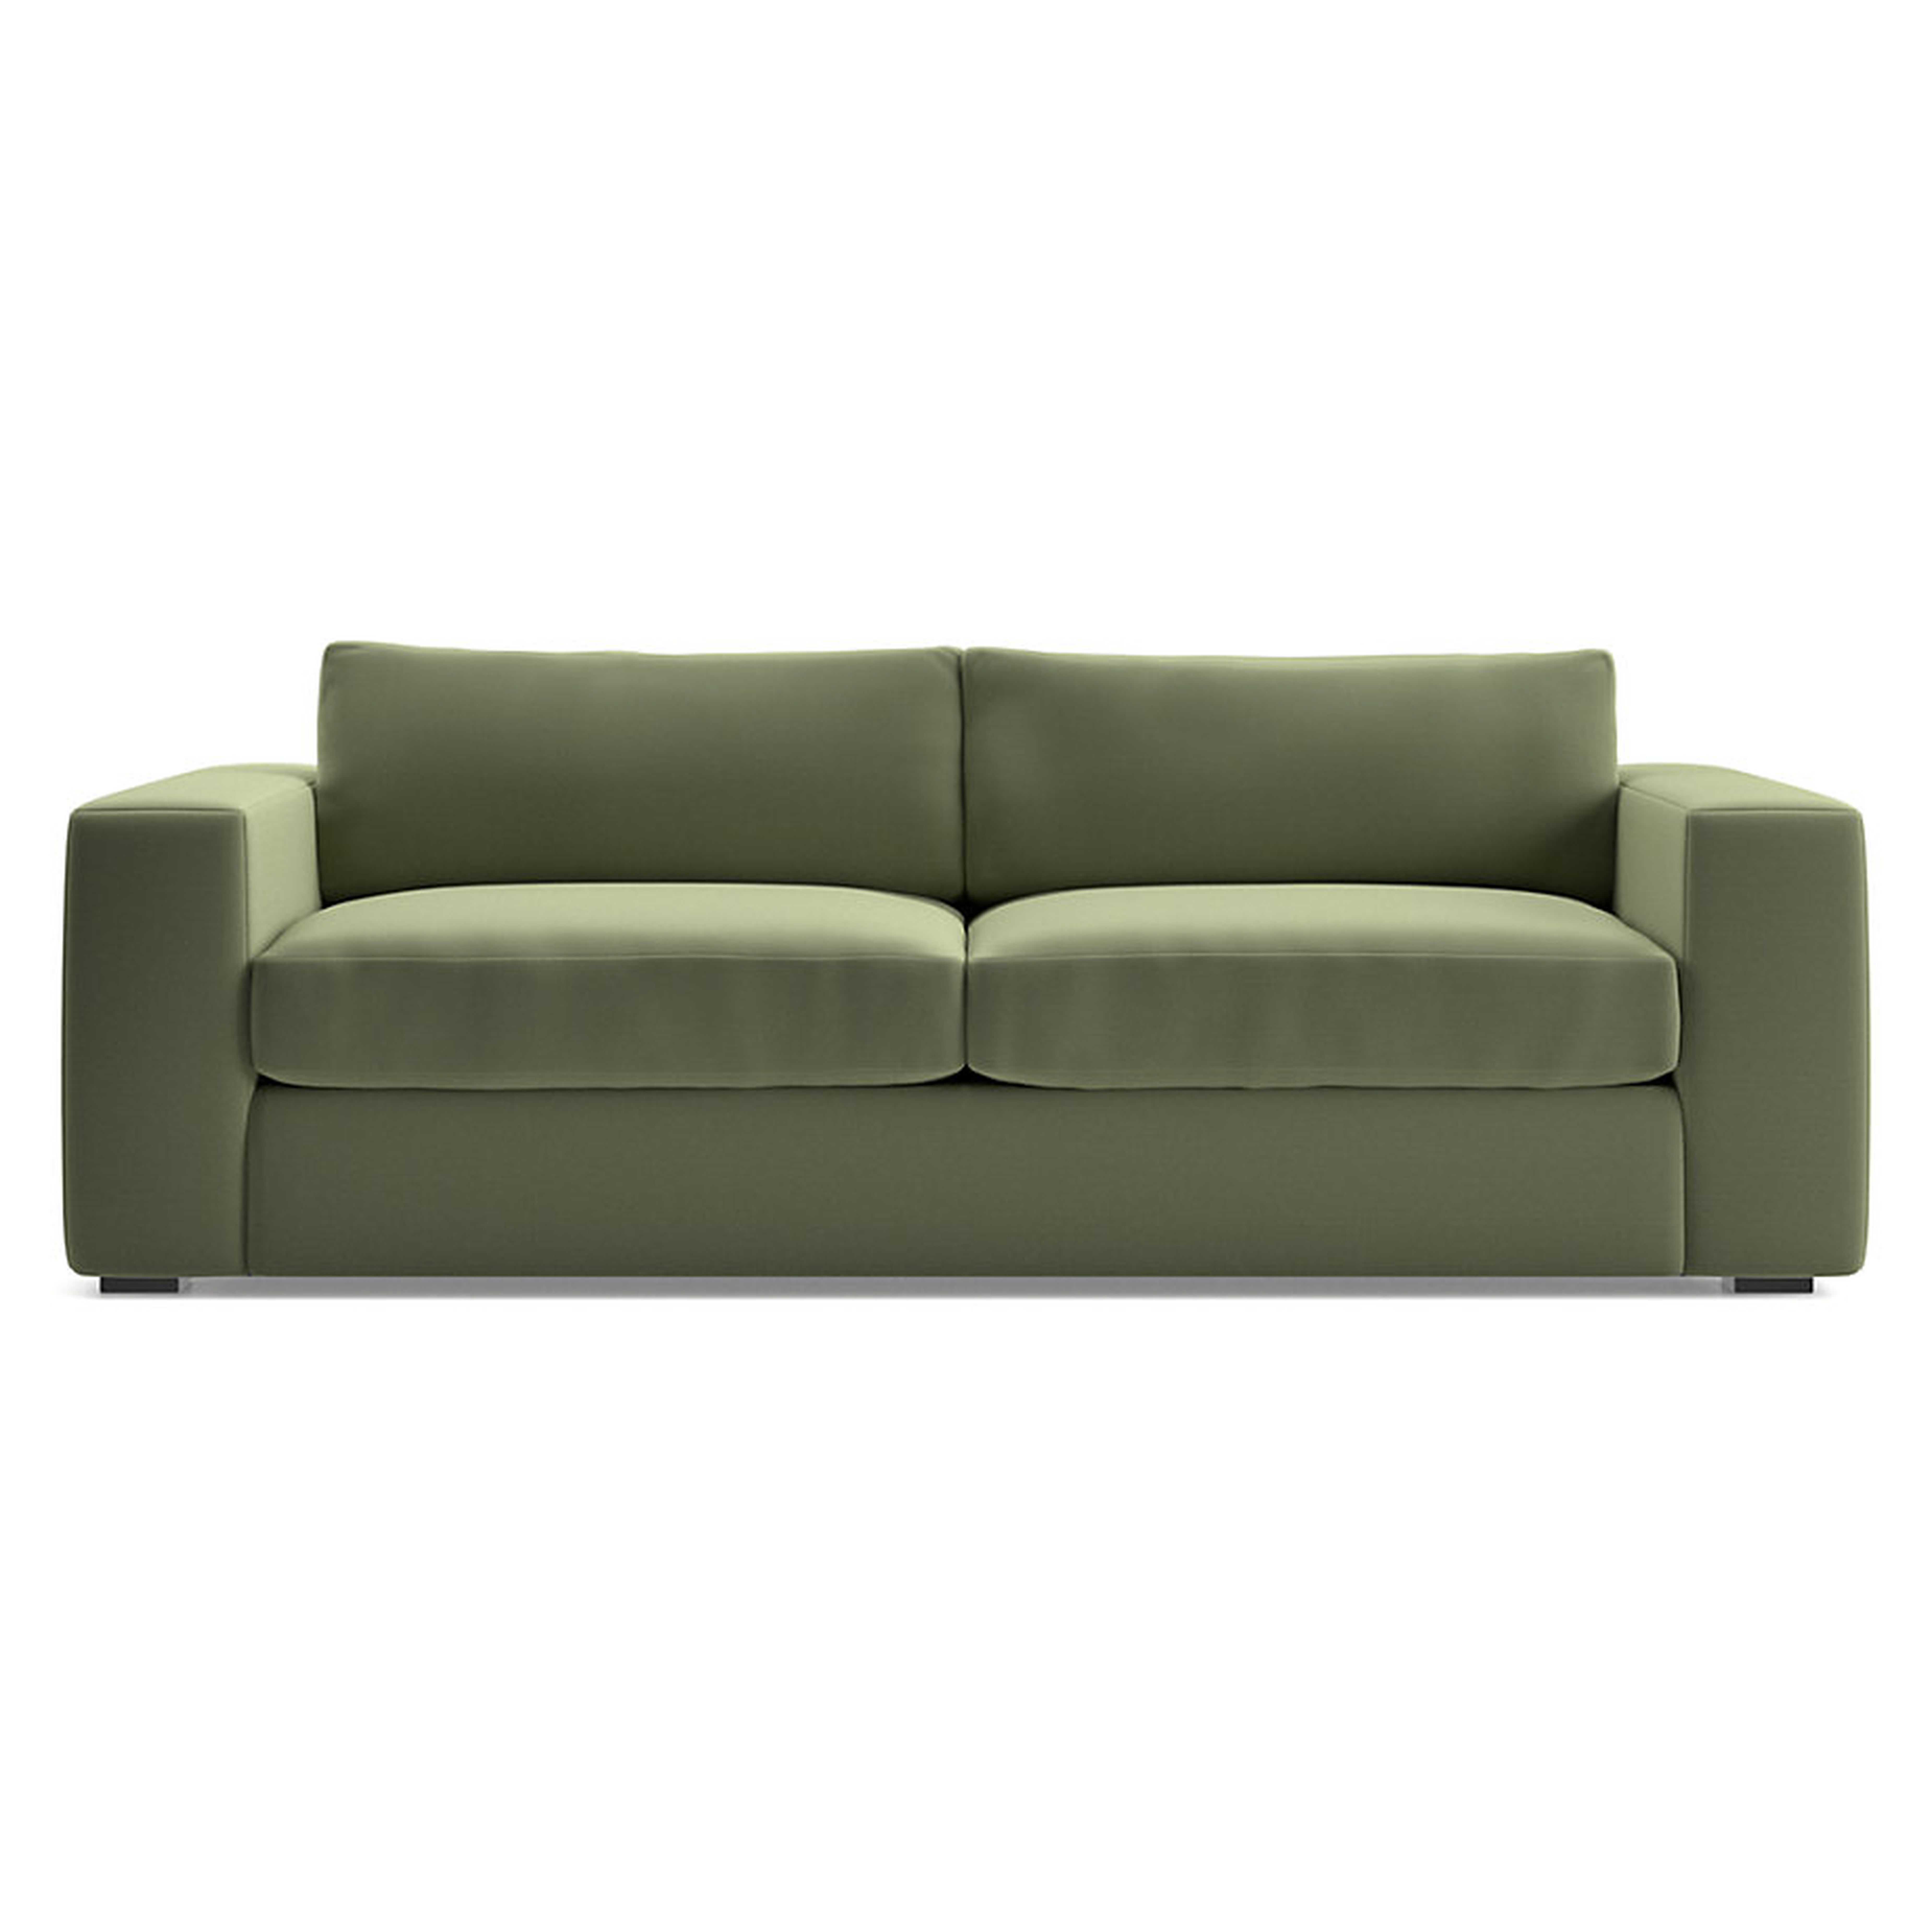 Oceanside Tall 90" Sofa RD - Crate and Barrel